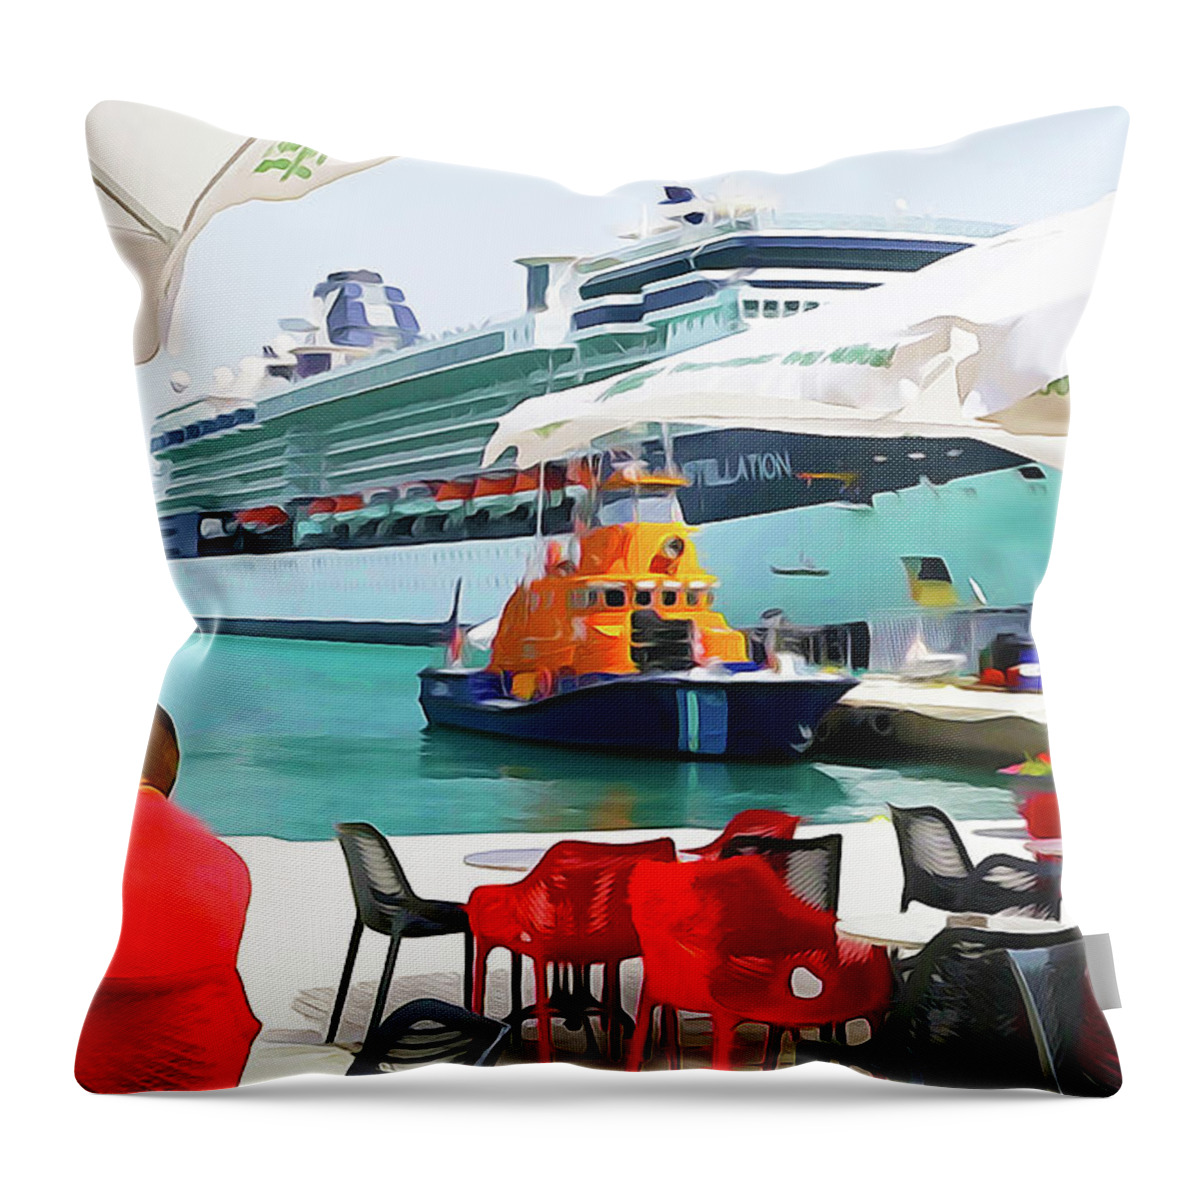 Cruise Ship Throw Pillow featuring the digital art Cruise Ship in Port by Dennis Cox